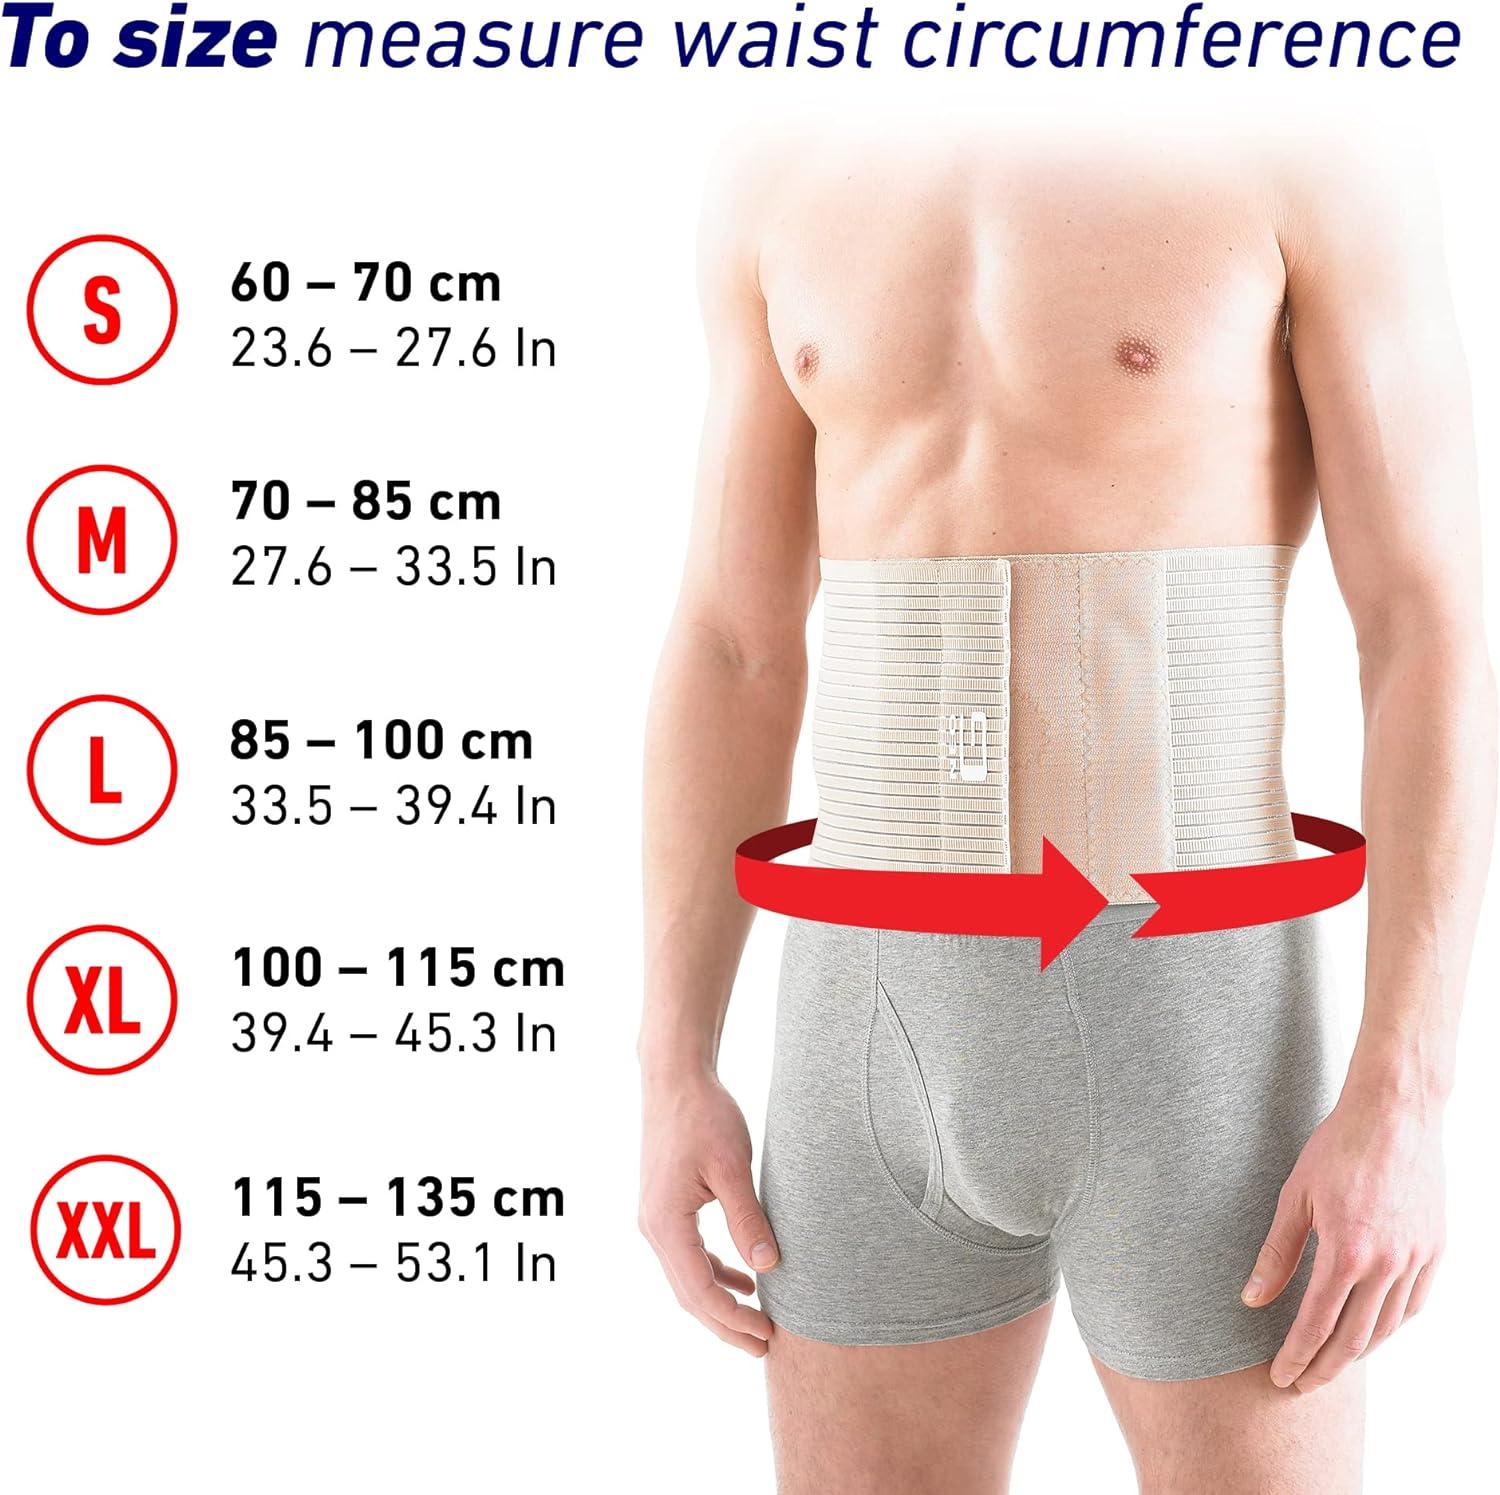 Neo-G Hernia Belt for Men and Women Upper Abdominal Hernia Support  Umbilical Hernia Support Belt - Reduces Symptoms of Overstrain & Exertion -  Breathable & Adjustable L Large